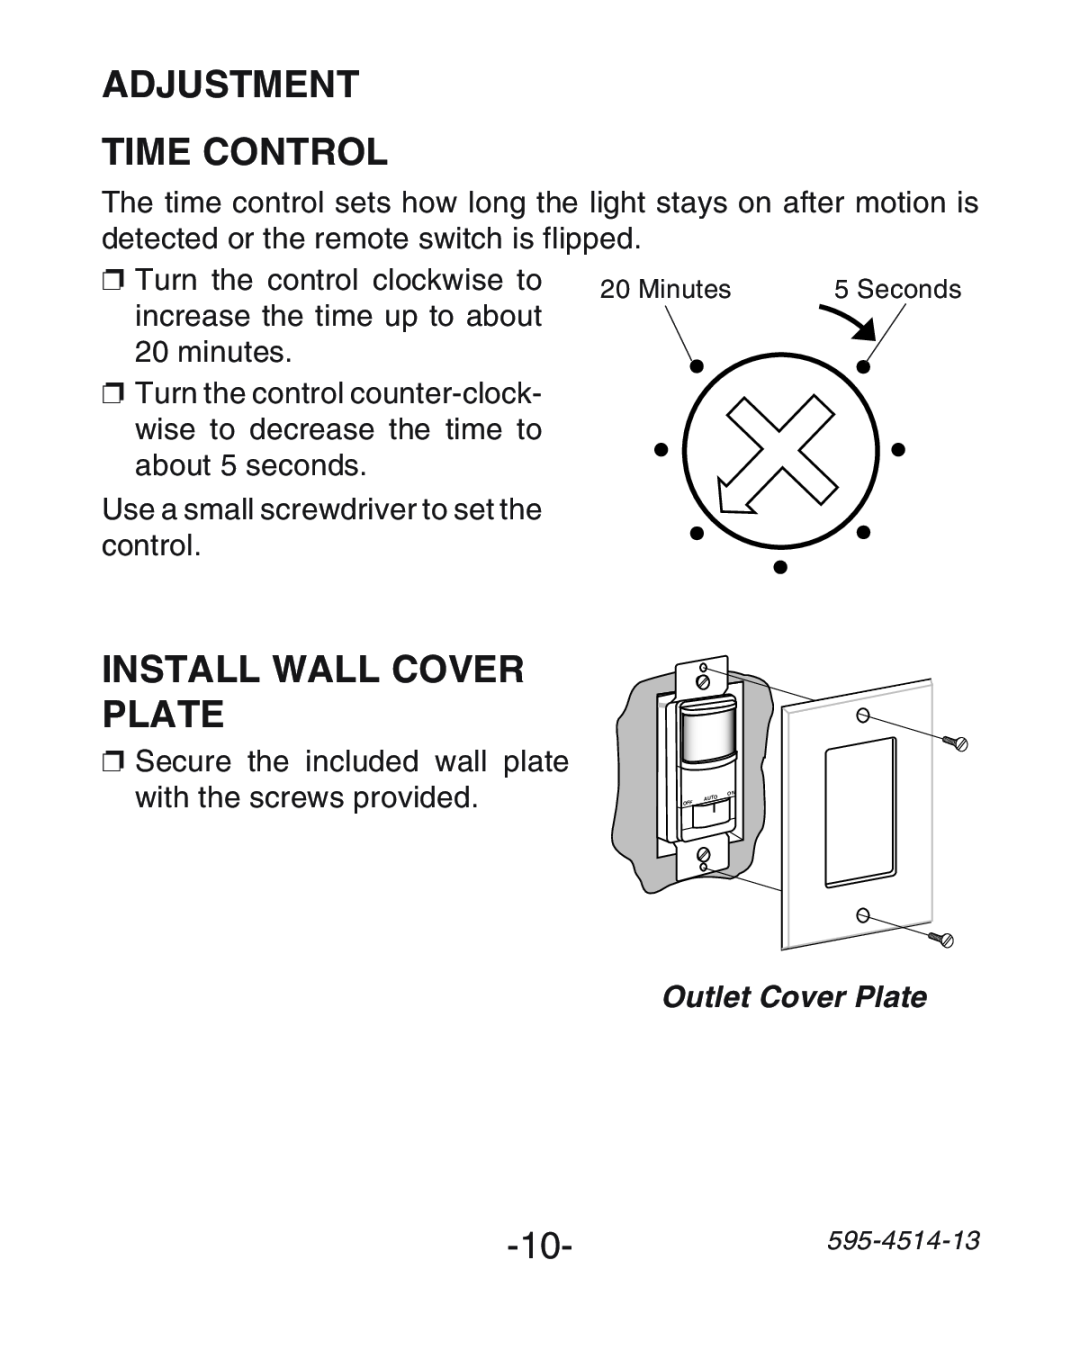 Heath Zenith SL-6107 manual Adjustment Time Control, Install Wall Cover Plate, Outlet Cover Plate 